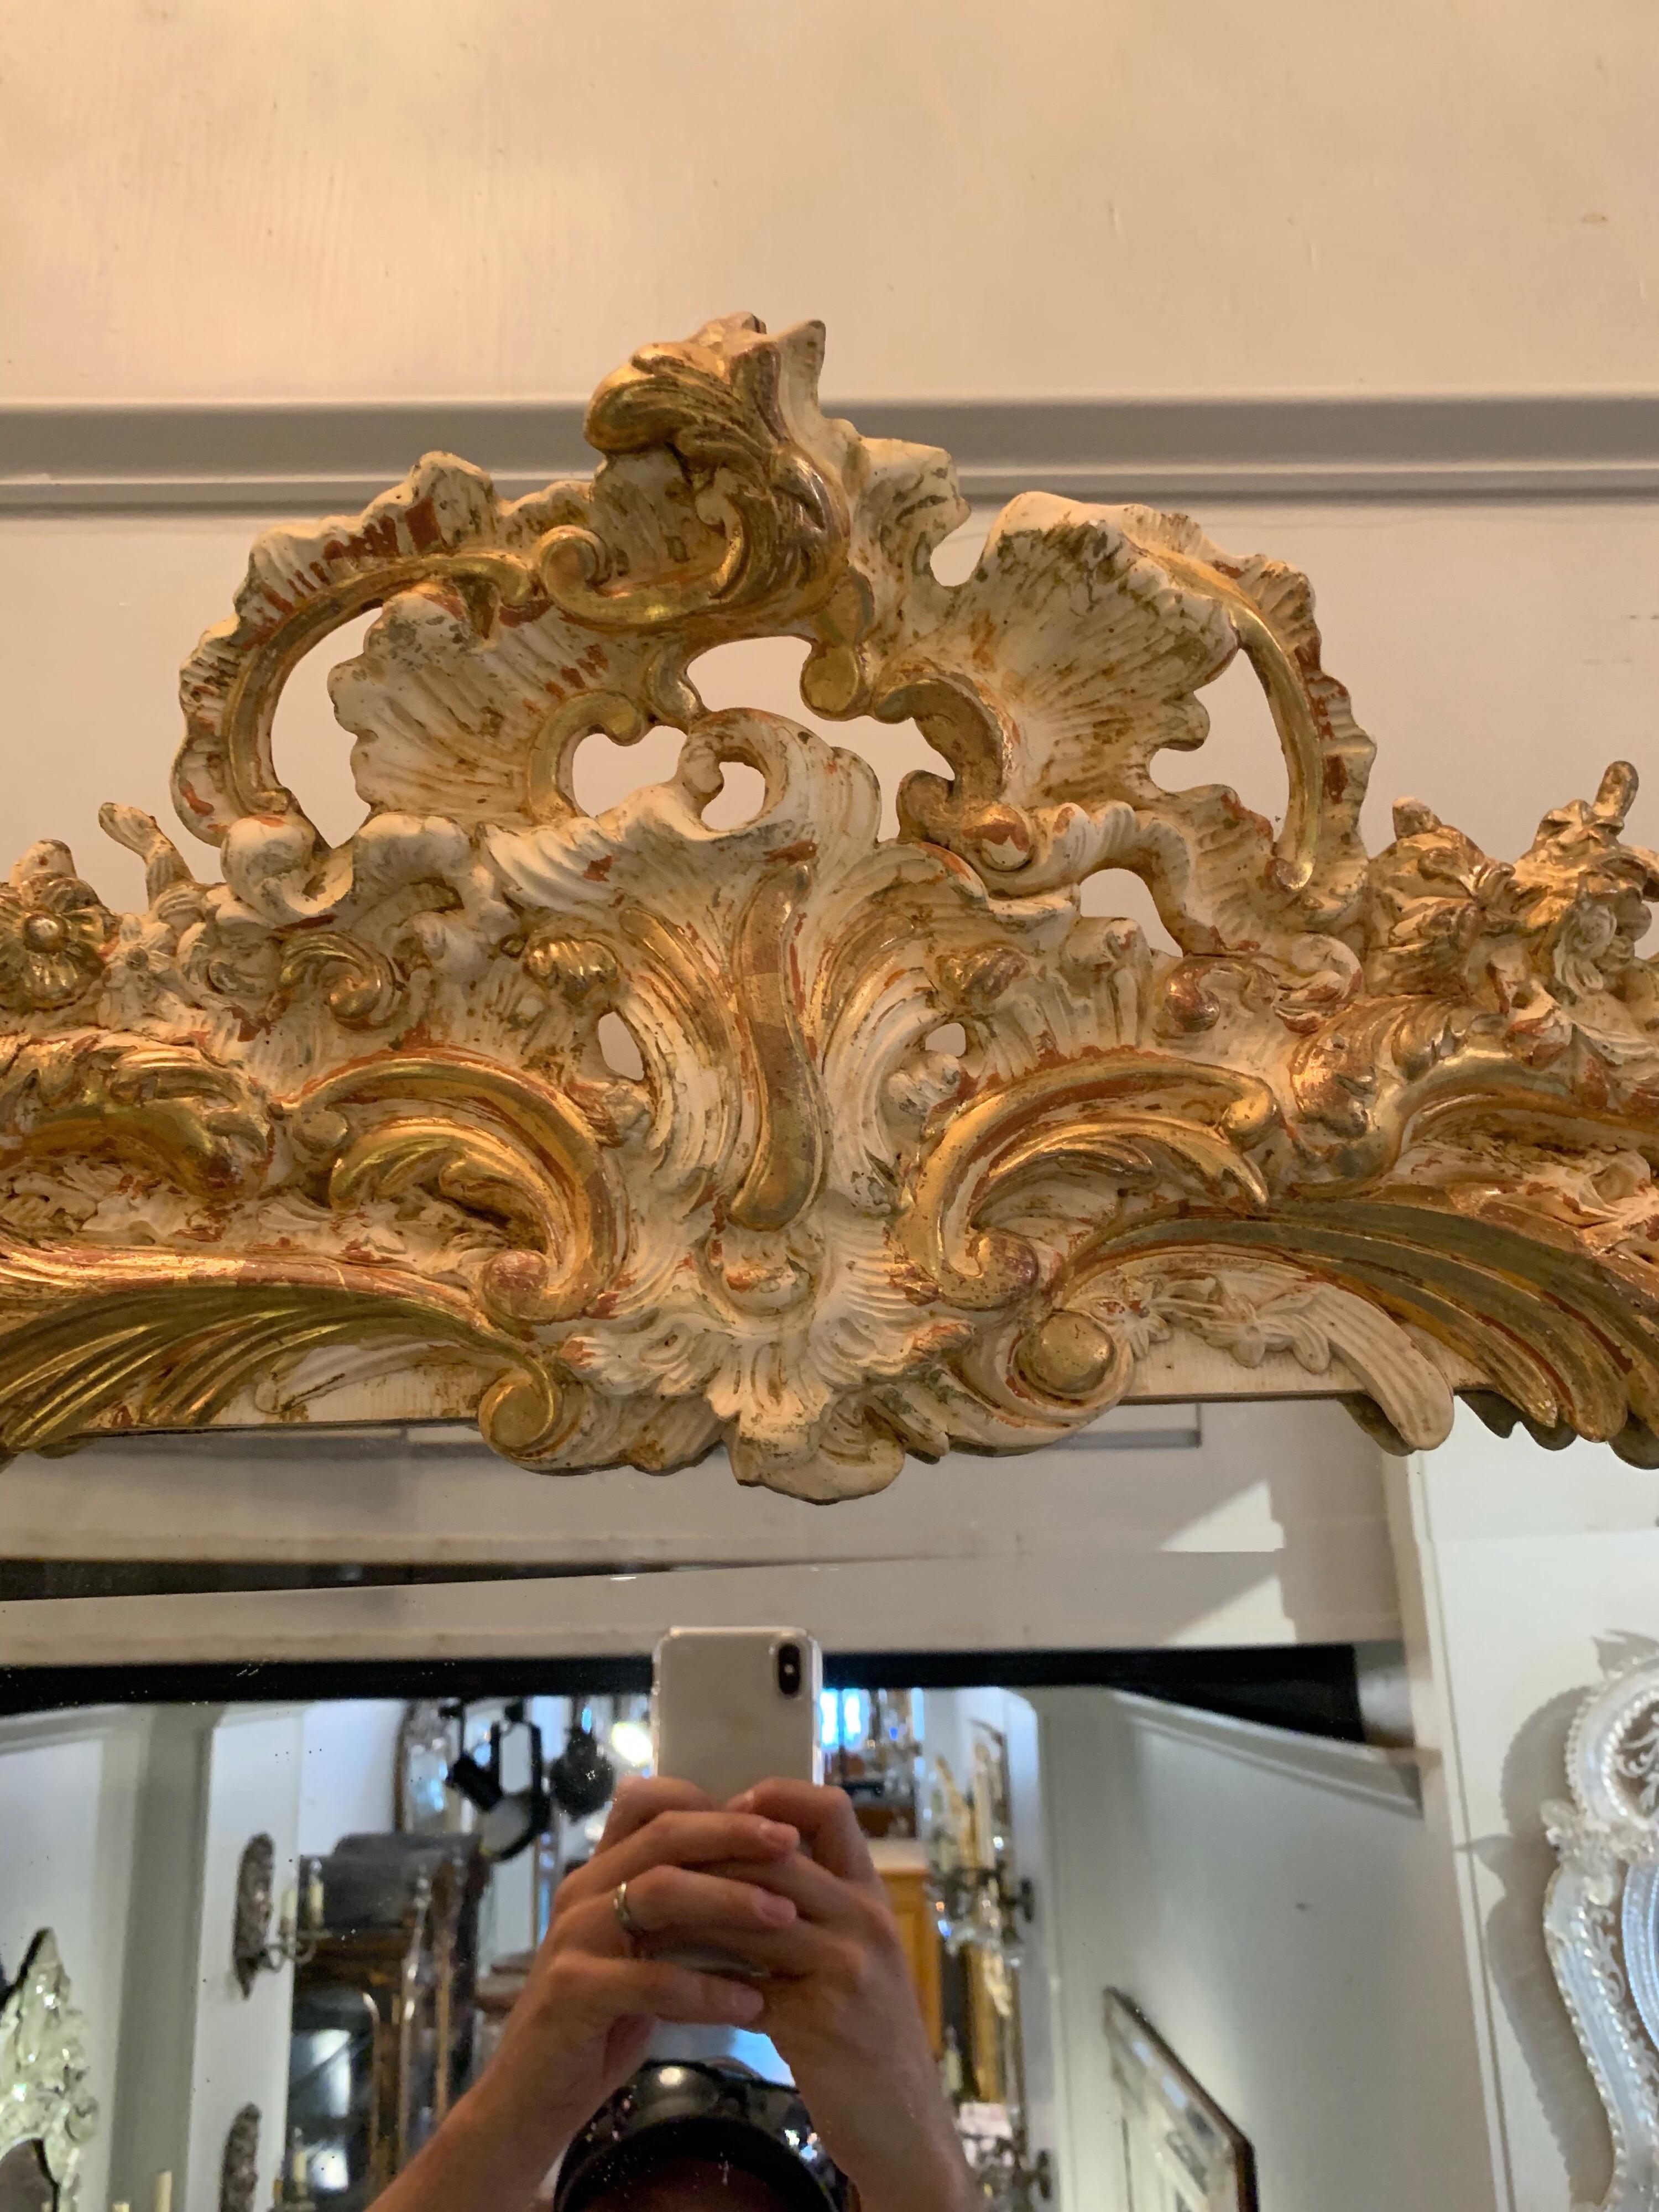 19th century Louis XV Style carved and parcel gilt mirror. Carvings of a shell, leaves and scrolls. An impressive mirror for a fine home.